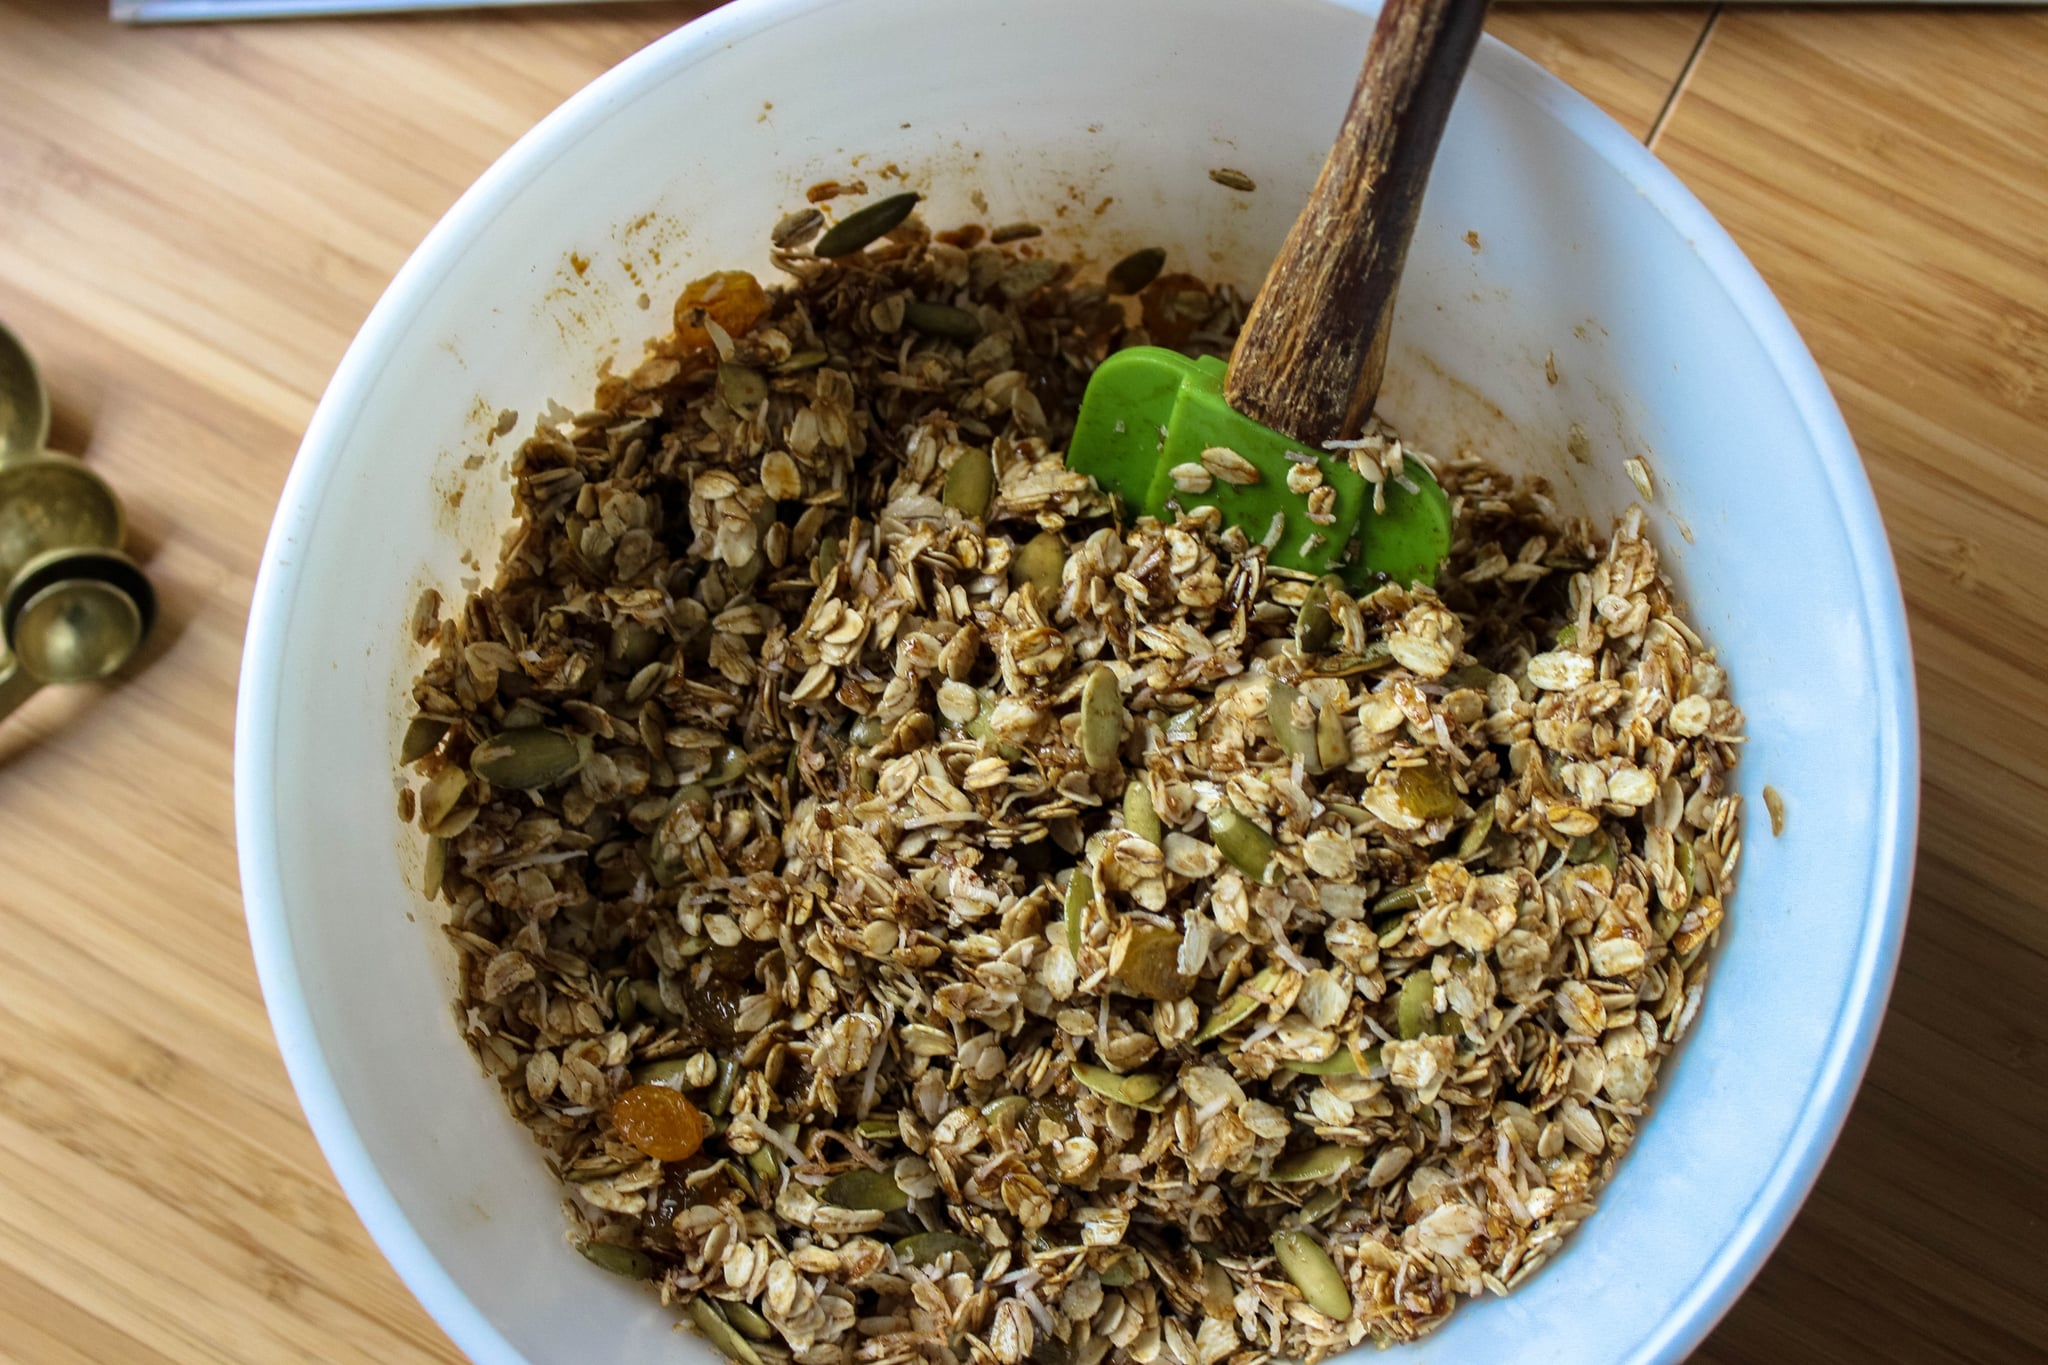 Sunday Spotlight: Making Granola in the Tefal Actifry